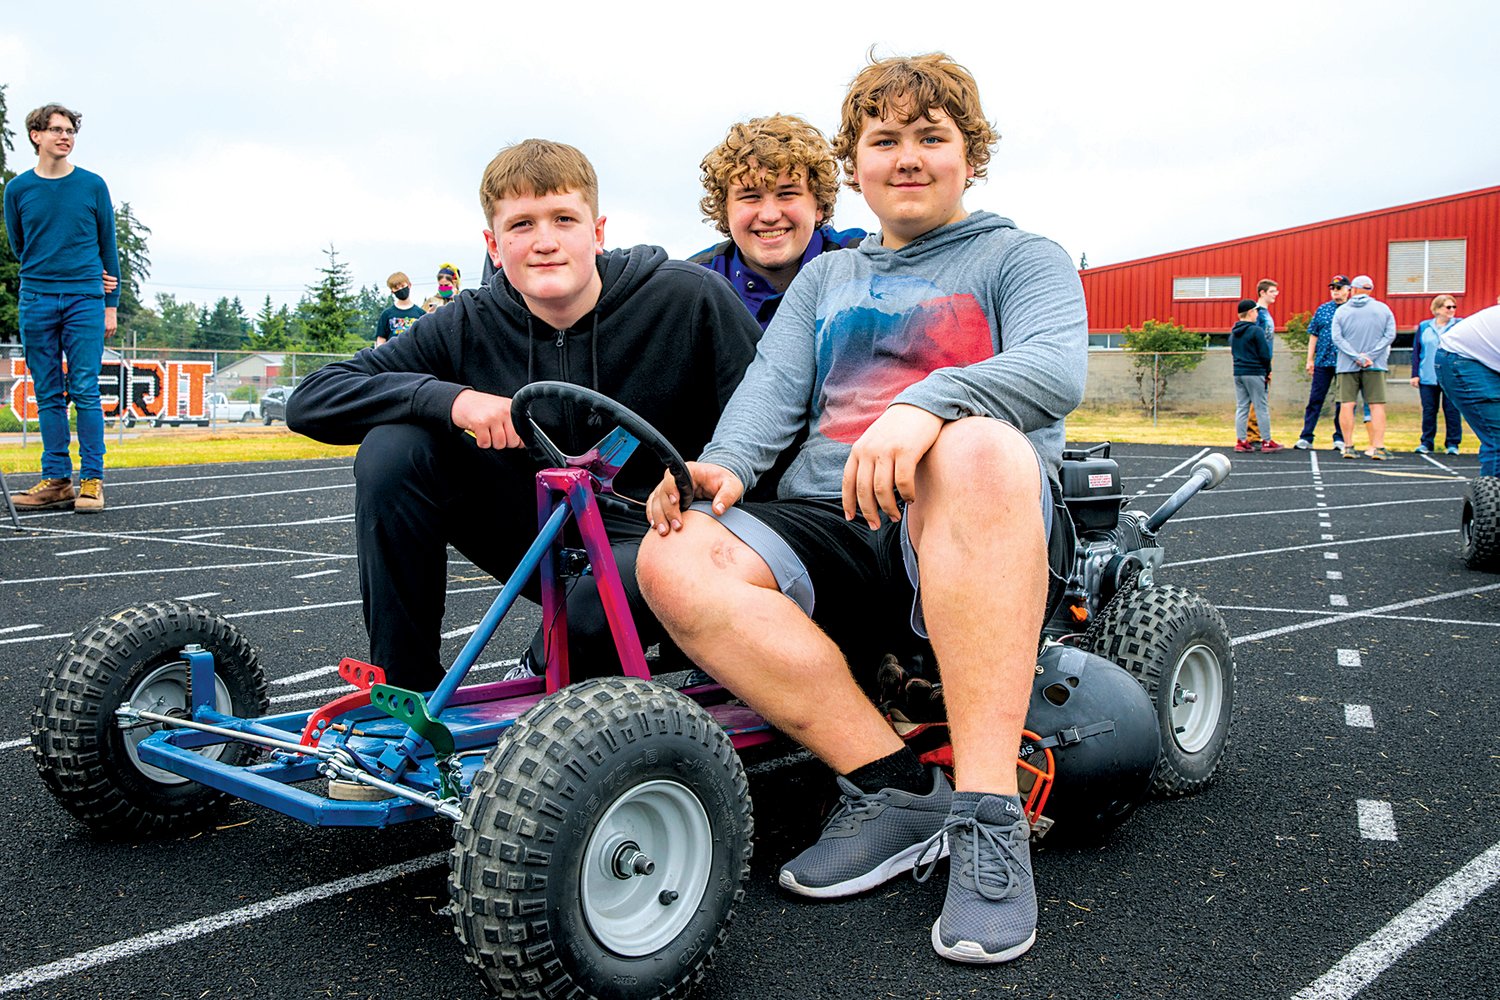 From left Maguire Finn, Lakota South and Nolan Gaskill pose for a photo with their go-kart on the Napavine High School track Thursday morning.